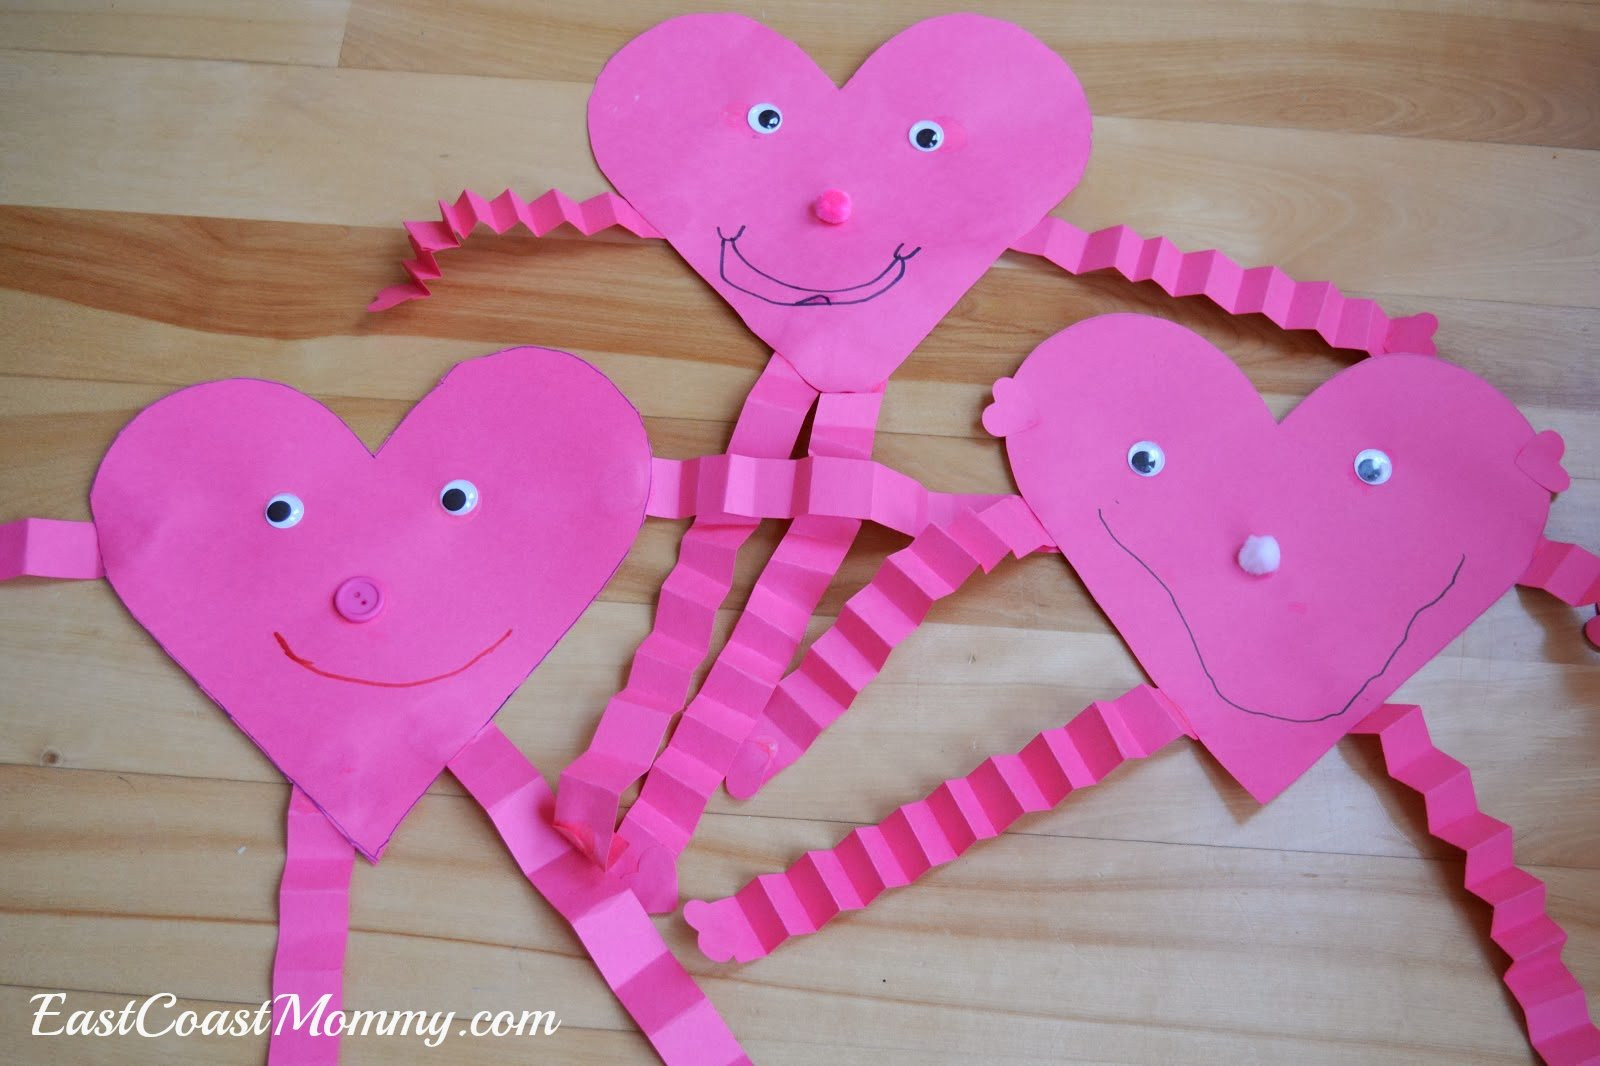 Toddler Valentine Craft Ideas
 12 Easy Valentine Crafts for Toddlers & Preschoolers You